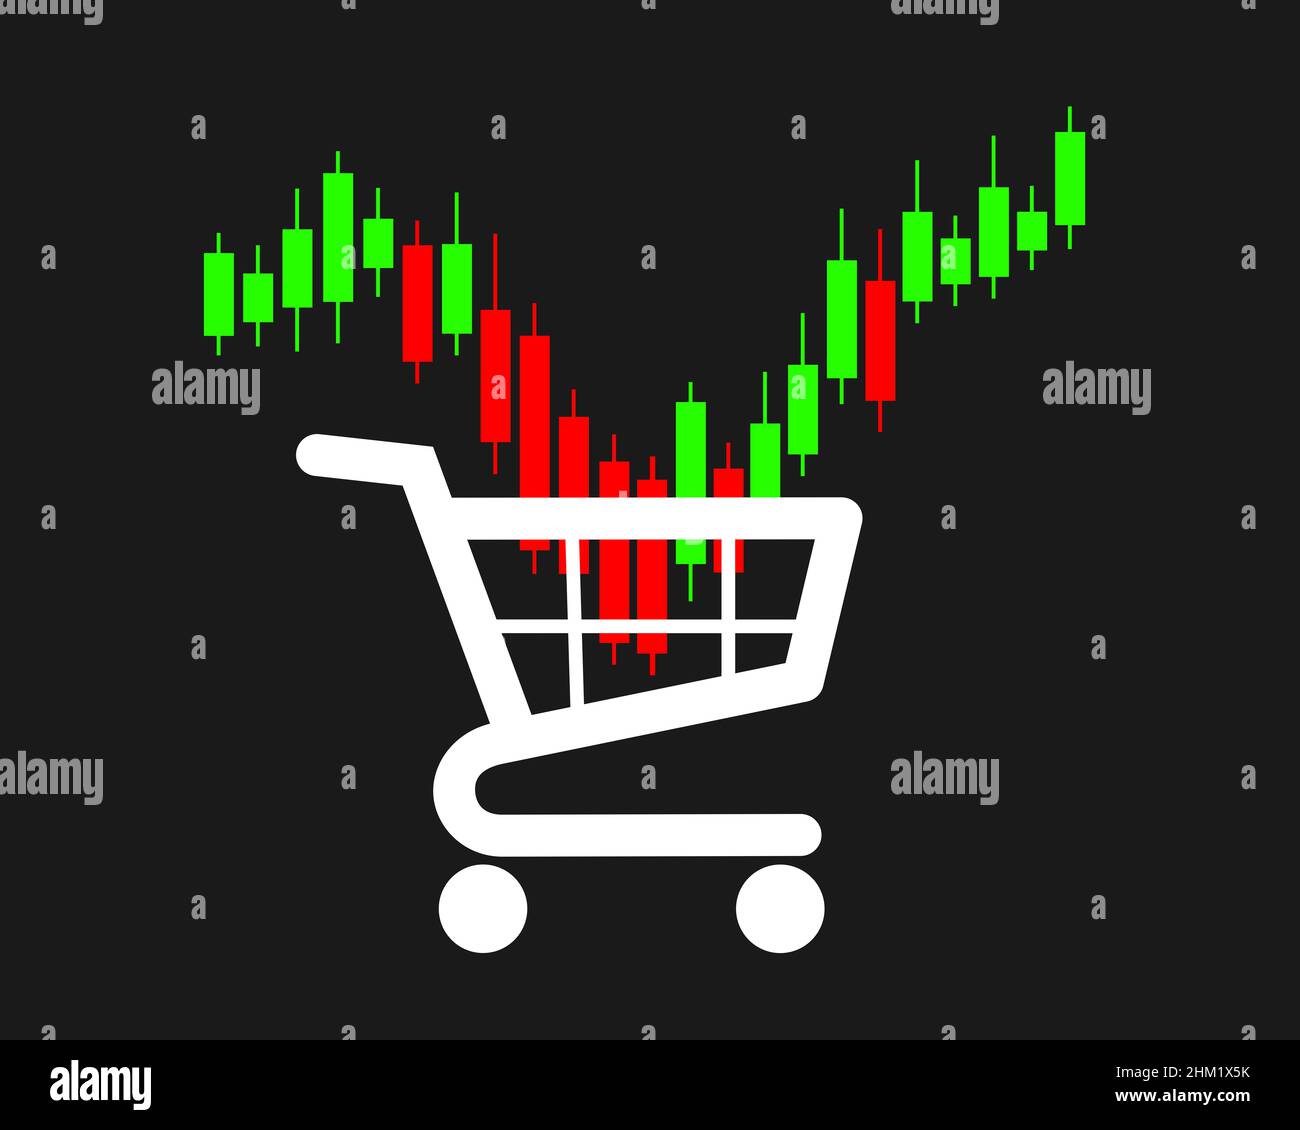 Buy the dip - investing and trading on stock market. Fluctuation of price and value. Shopping cart and candlestick chart. Vector illustration isolated Stock Photo